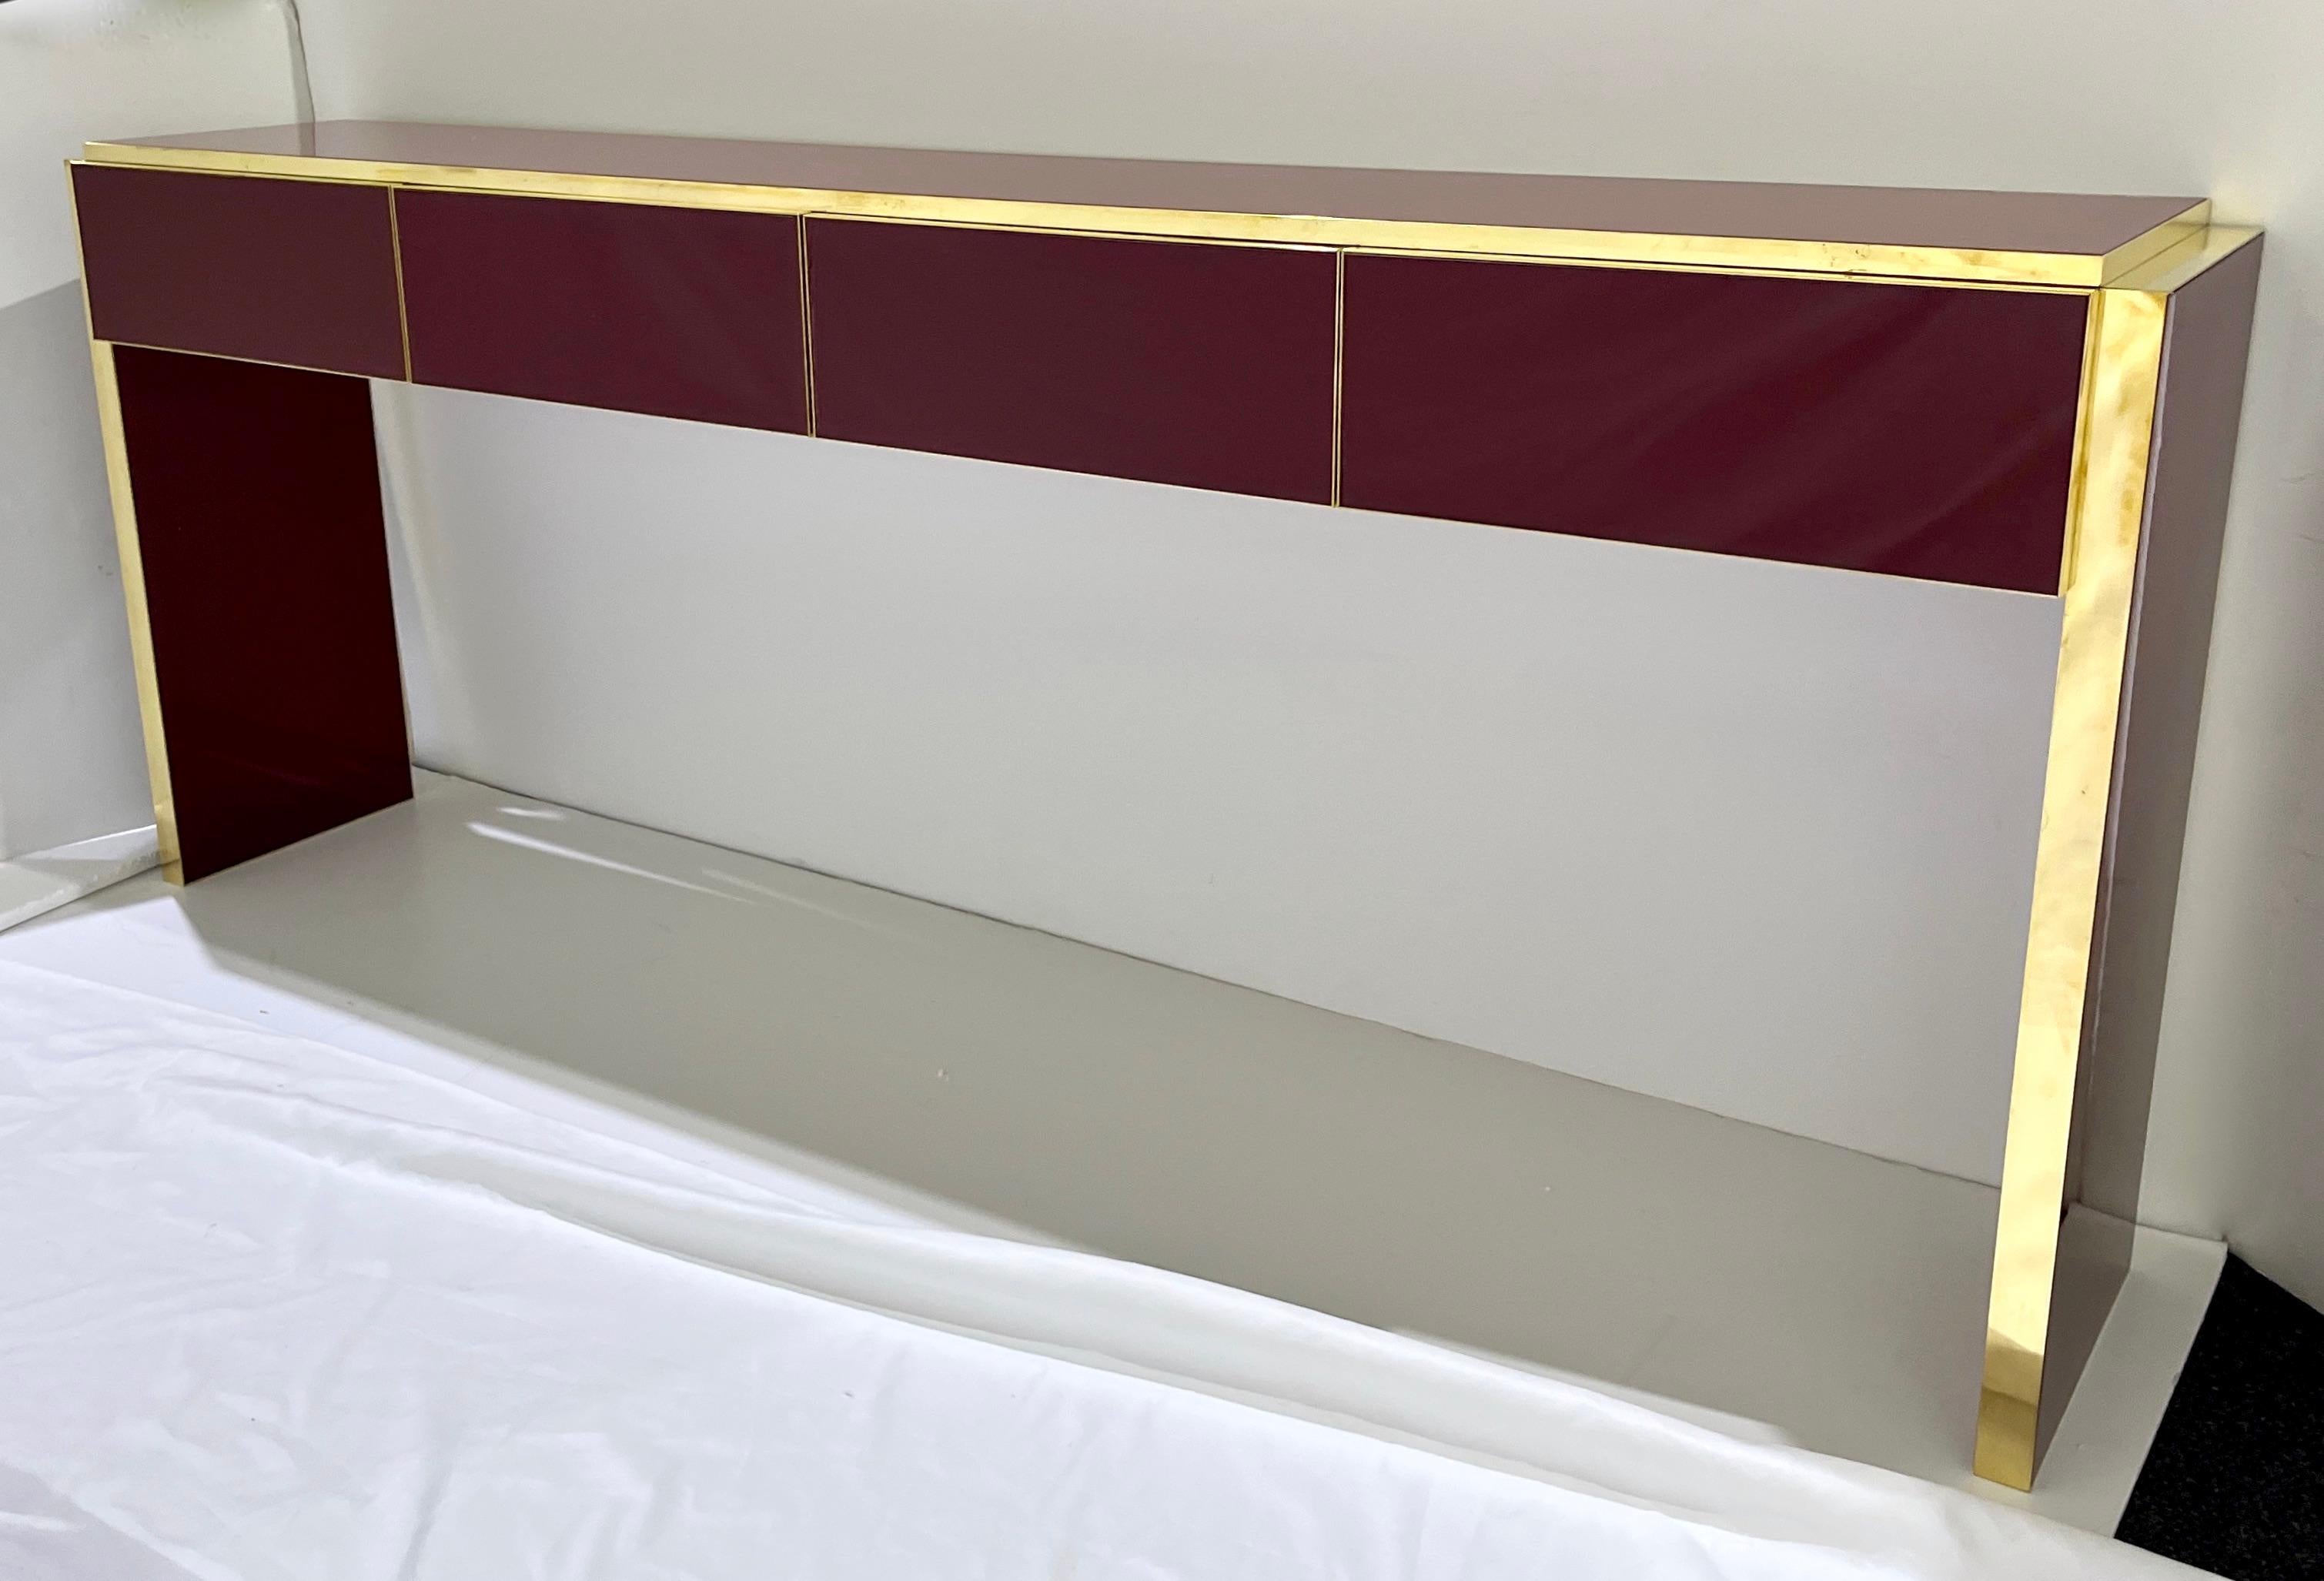 Bespoke Italian Long 4 Drawers Burgundy Wine & Brass Console Table/Sideboard In New Condition For Sale In New York, NY